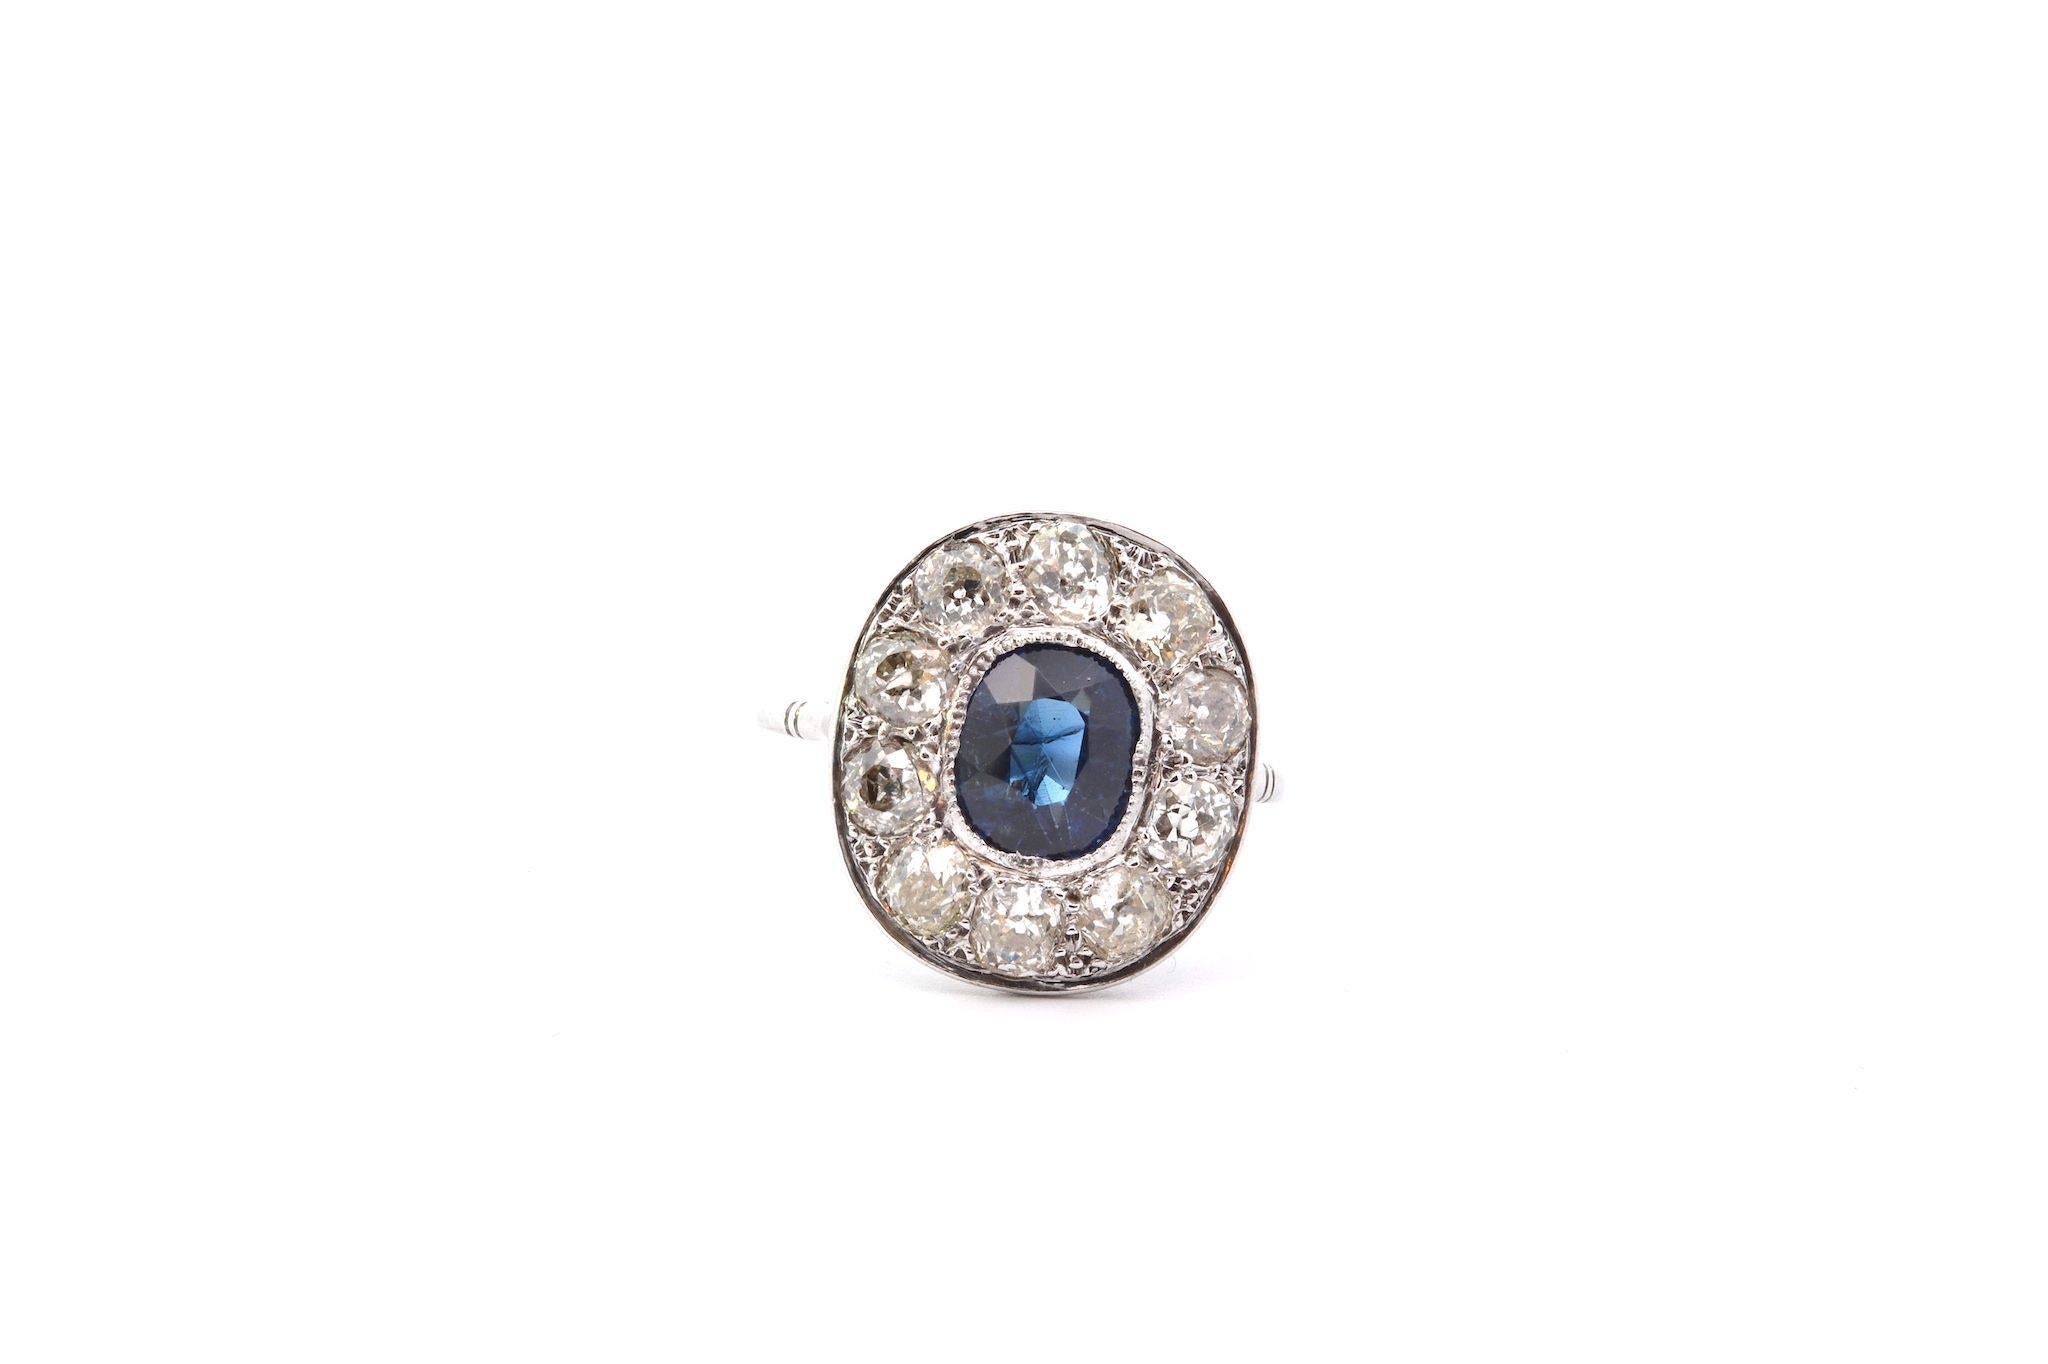 Stones: 1 cushion sapphire of 2.18 cts and 10 old cut diamonds of 1.90cts
Material: Platinum
Dimensions: 1.7cm x 1.5cm
Weight: 3.3g
Period: 1950
Size: 54 (free sizing).
Certificate
Ref. : 25014